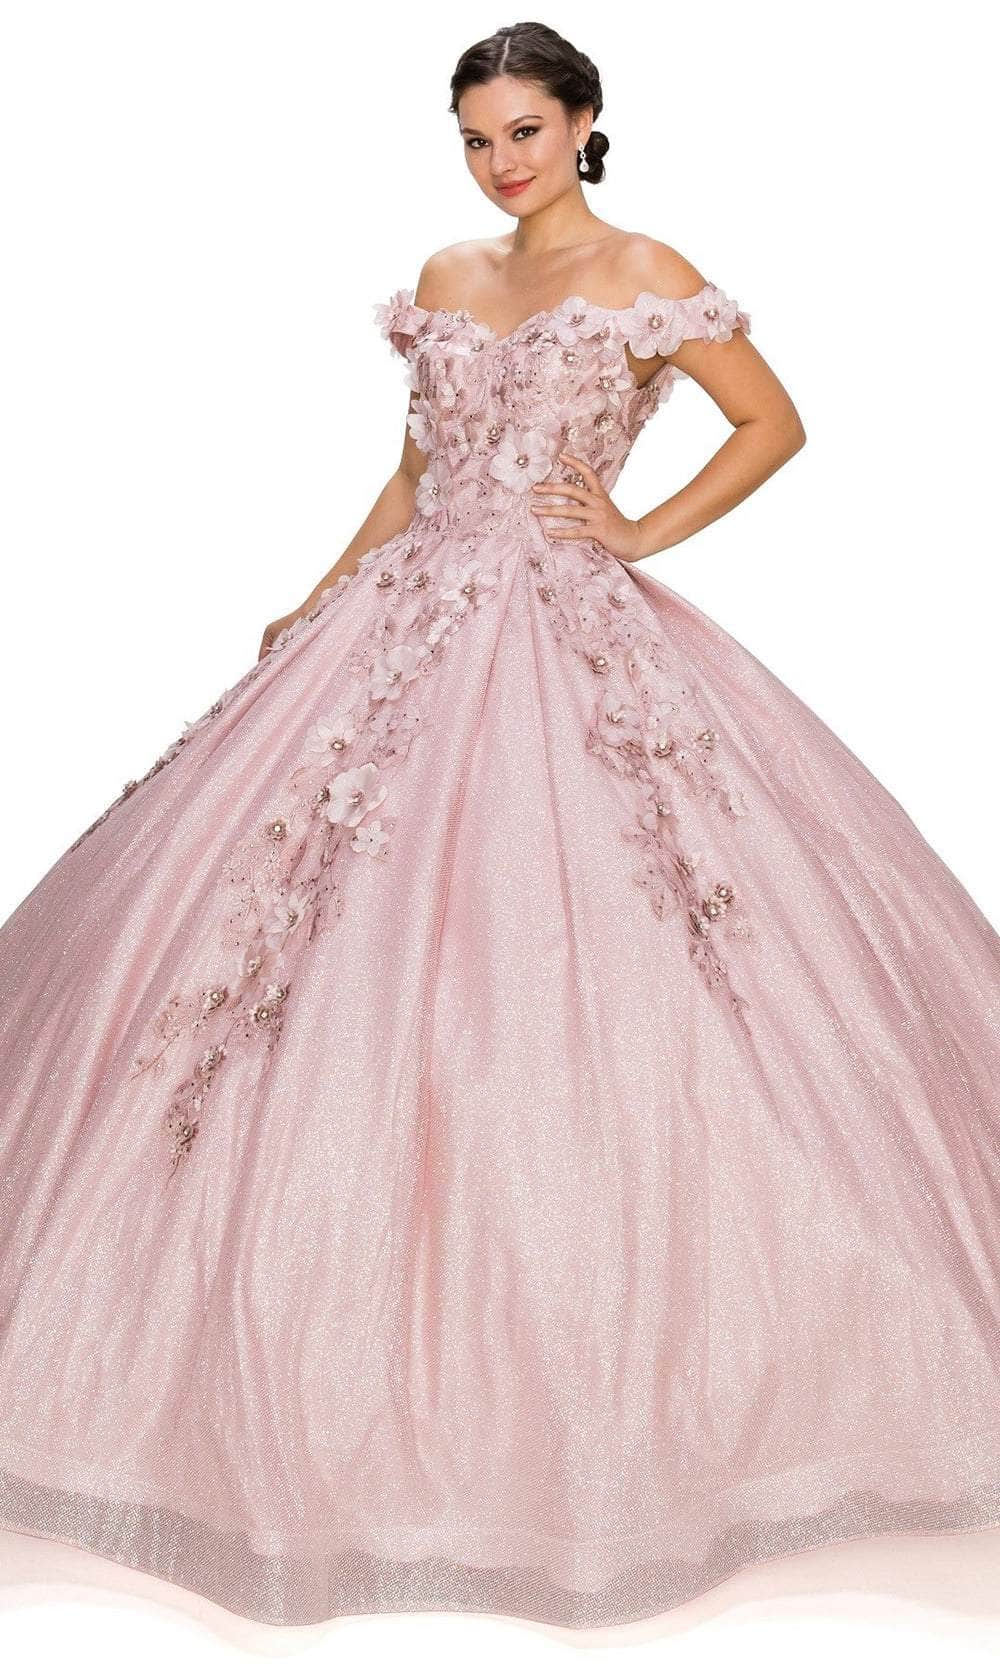 Cinderella Couture 8020J - 3D Floral Appliqued Ballgown Special Occasion Dress XS / Dusty Rose